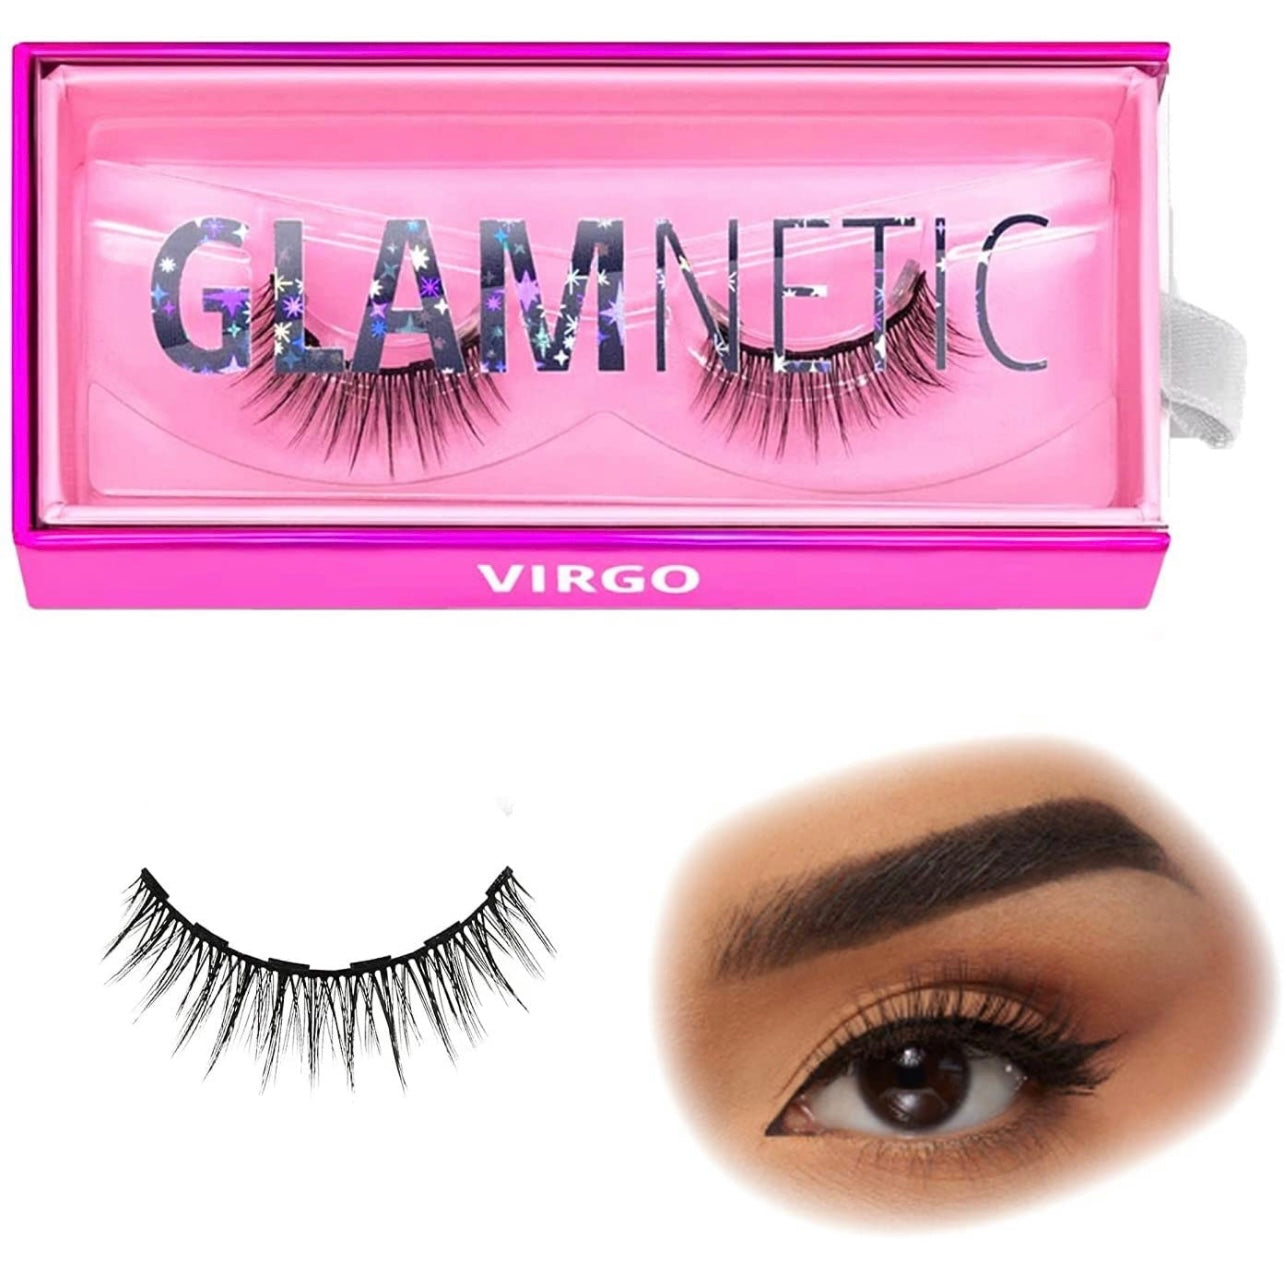 Glamnetic Magnetic Eyelashes - Virgo | Short Magnetic Lashes, 60 Wears Reusable Faux Mink Lashes Natural Look - 1 Pair